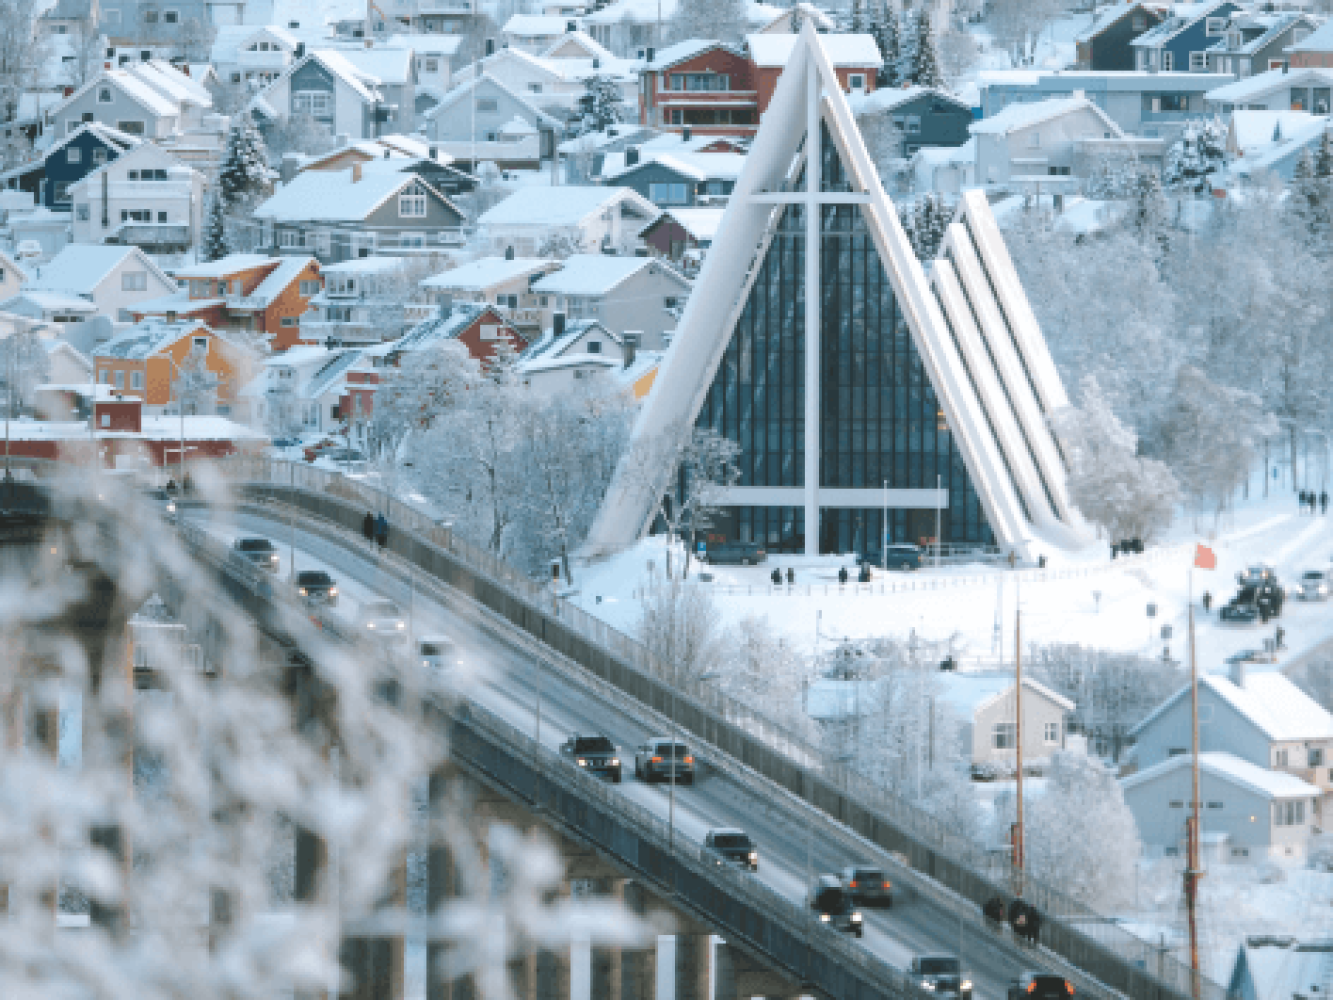 Tromsø bridge and the Arctic Cathedral in winter